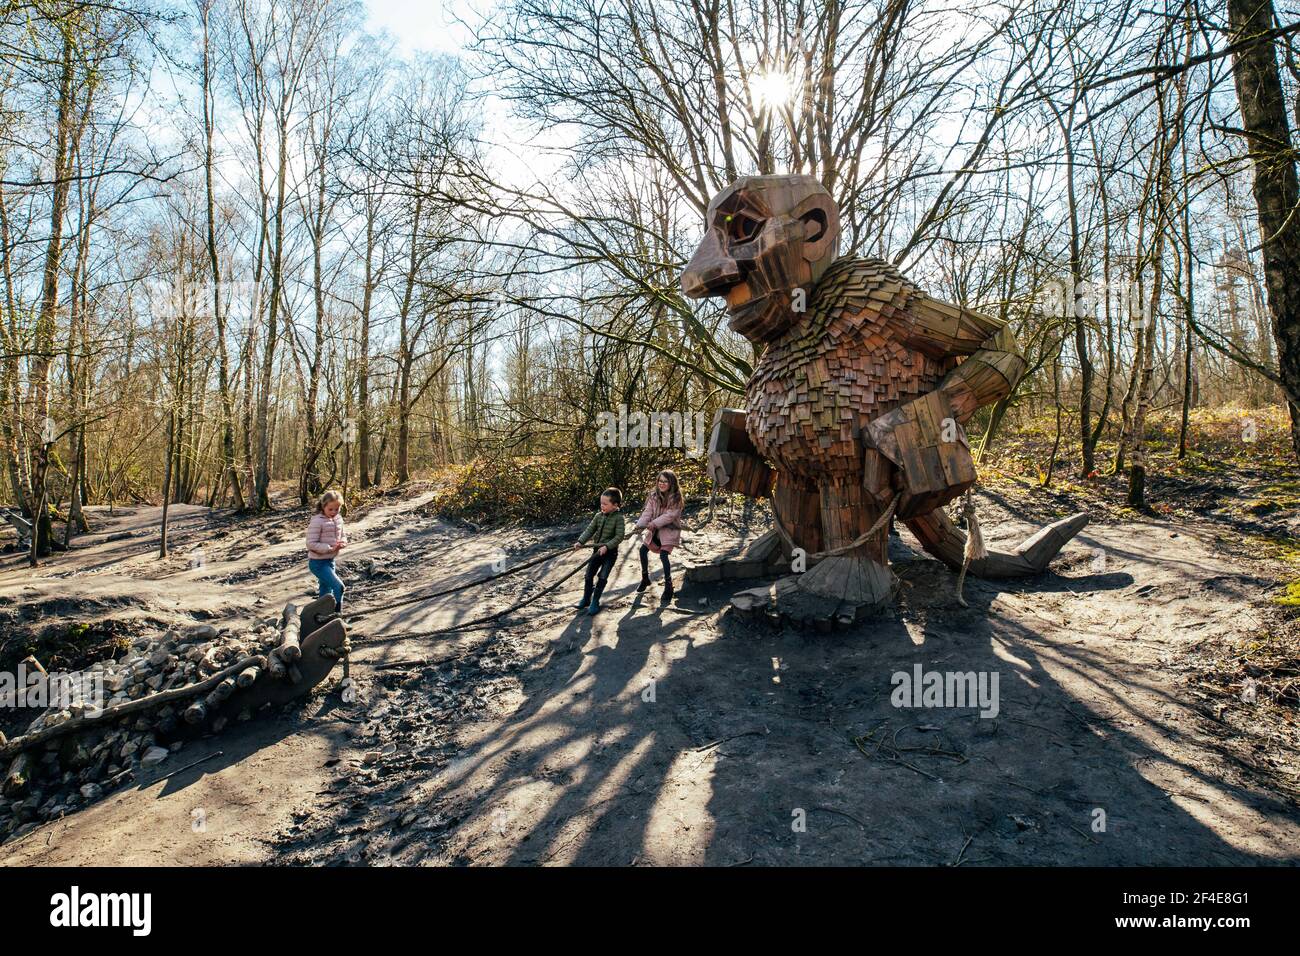 (210321) -- BOOM, March 21, 2021 (Xinhua) -- Children play with a 'troll' at the De Schorre forest park in Boom, Belgium, March 20, 2021. Danish artist Thomas Dambo and his team built seven giant 'trolls' from reclaimed wood at the De Schorre forest park in northern Belgium in 2019. These giant wooden sculptures are dotted around the forest. The United Nations General Assembly proclaimed March 21 as the International Day of Forests which celebrates and creates awareness on the importance of all types of forests and on the need to preserve and care for the world's woodlands. This year the Stock Photo